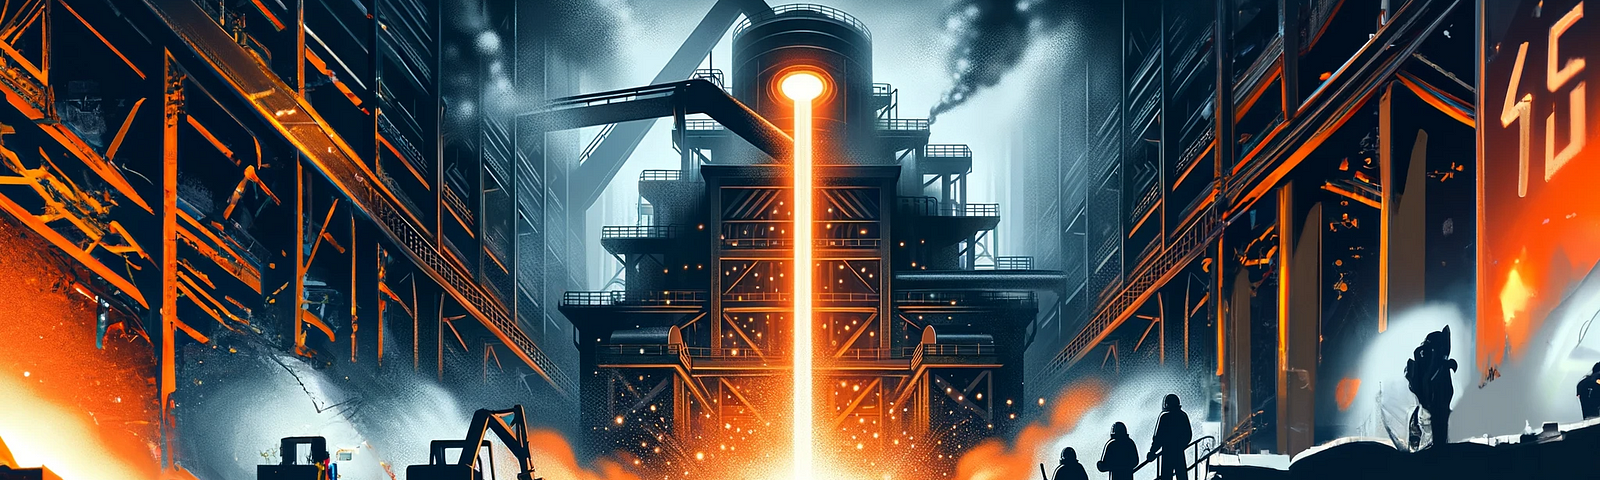 Dall-E generated image from ChatGPT generated prompt Illustration of a steel mill in operation. Glowing molten metal flows from a large furnace into molds. Sparks fly, illuminating the dark interior. In the background, silhouettes of workers in protective gear observe the process, emphasizing the scale and intensity of steel manufacturing.